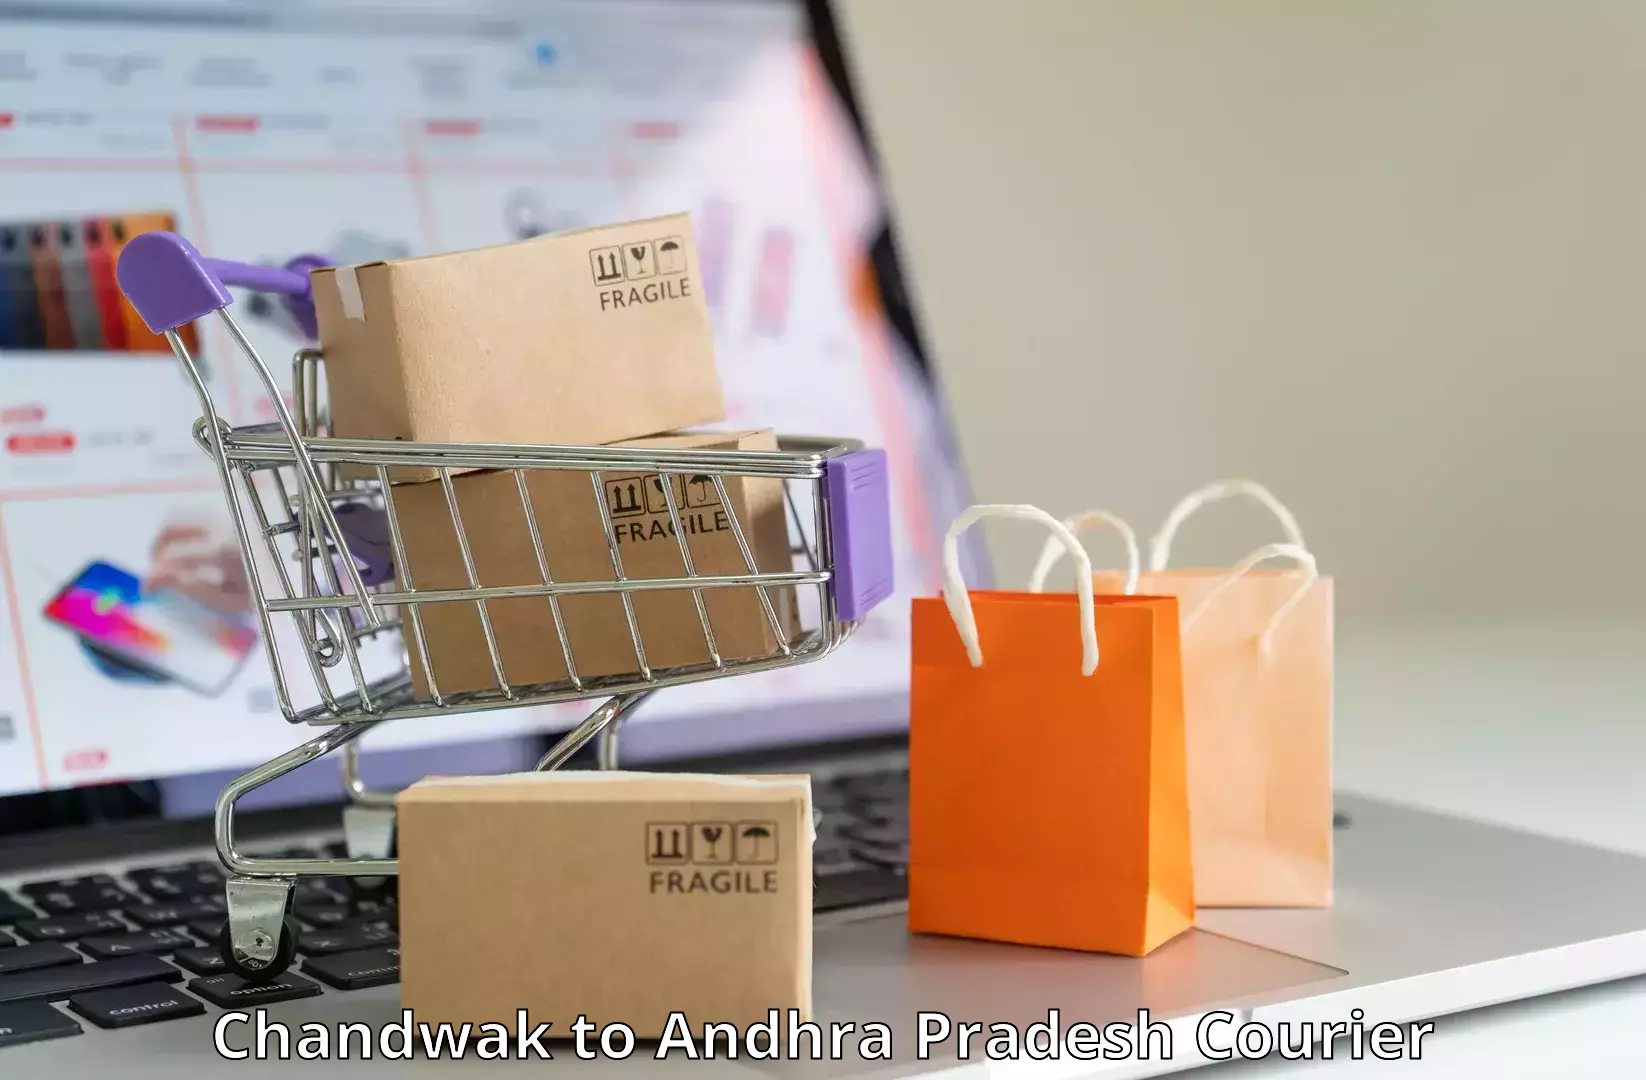 Quality courier services Chandwak to Punganur